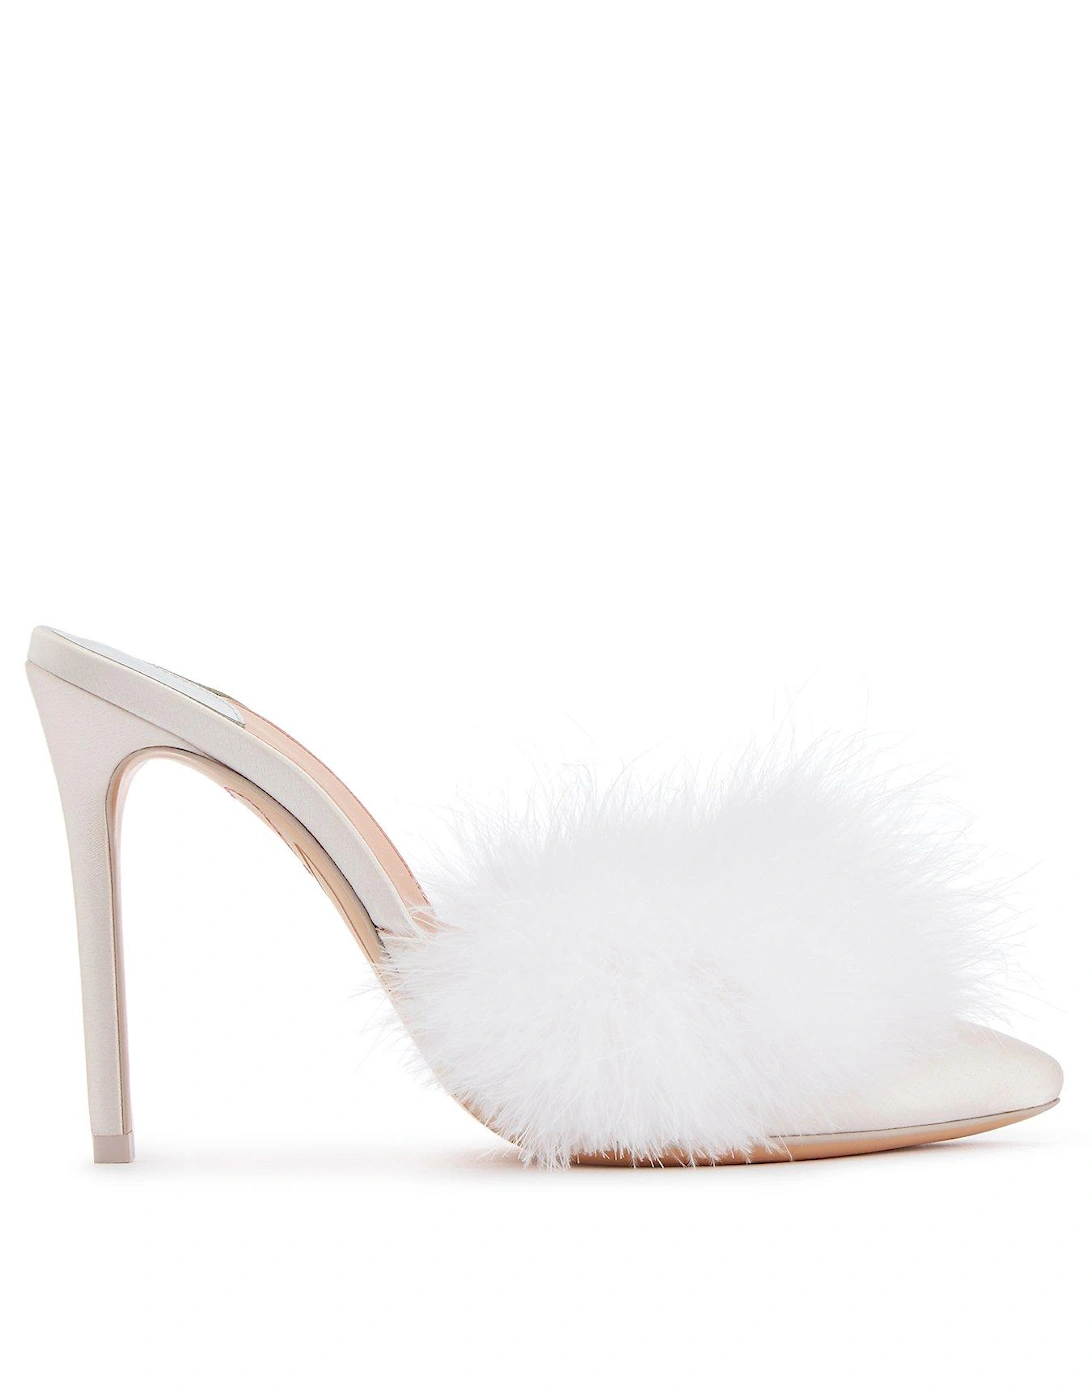 Delicia Heeled Mule - Ivory Satin, 4 of 3